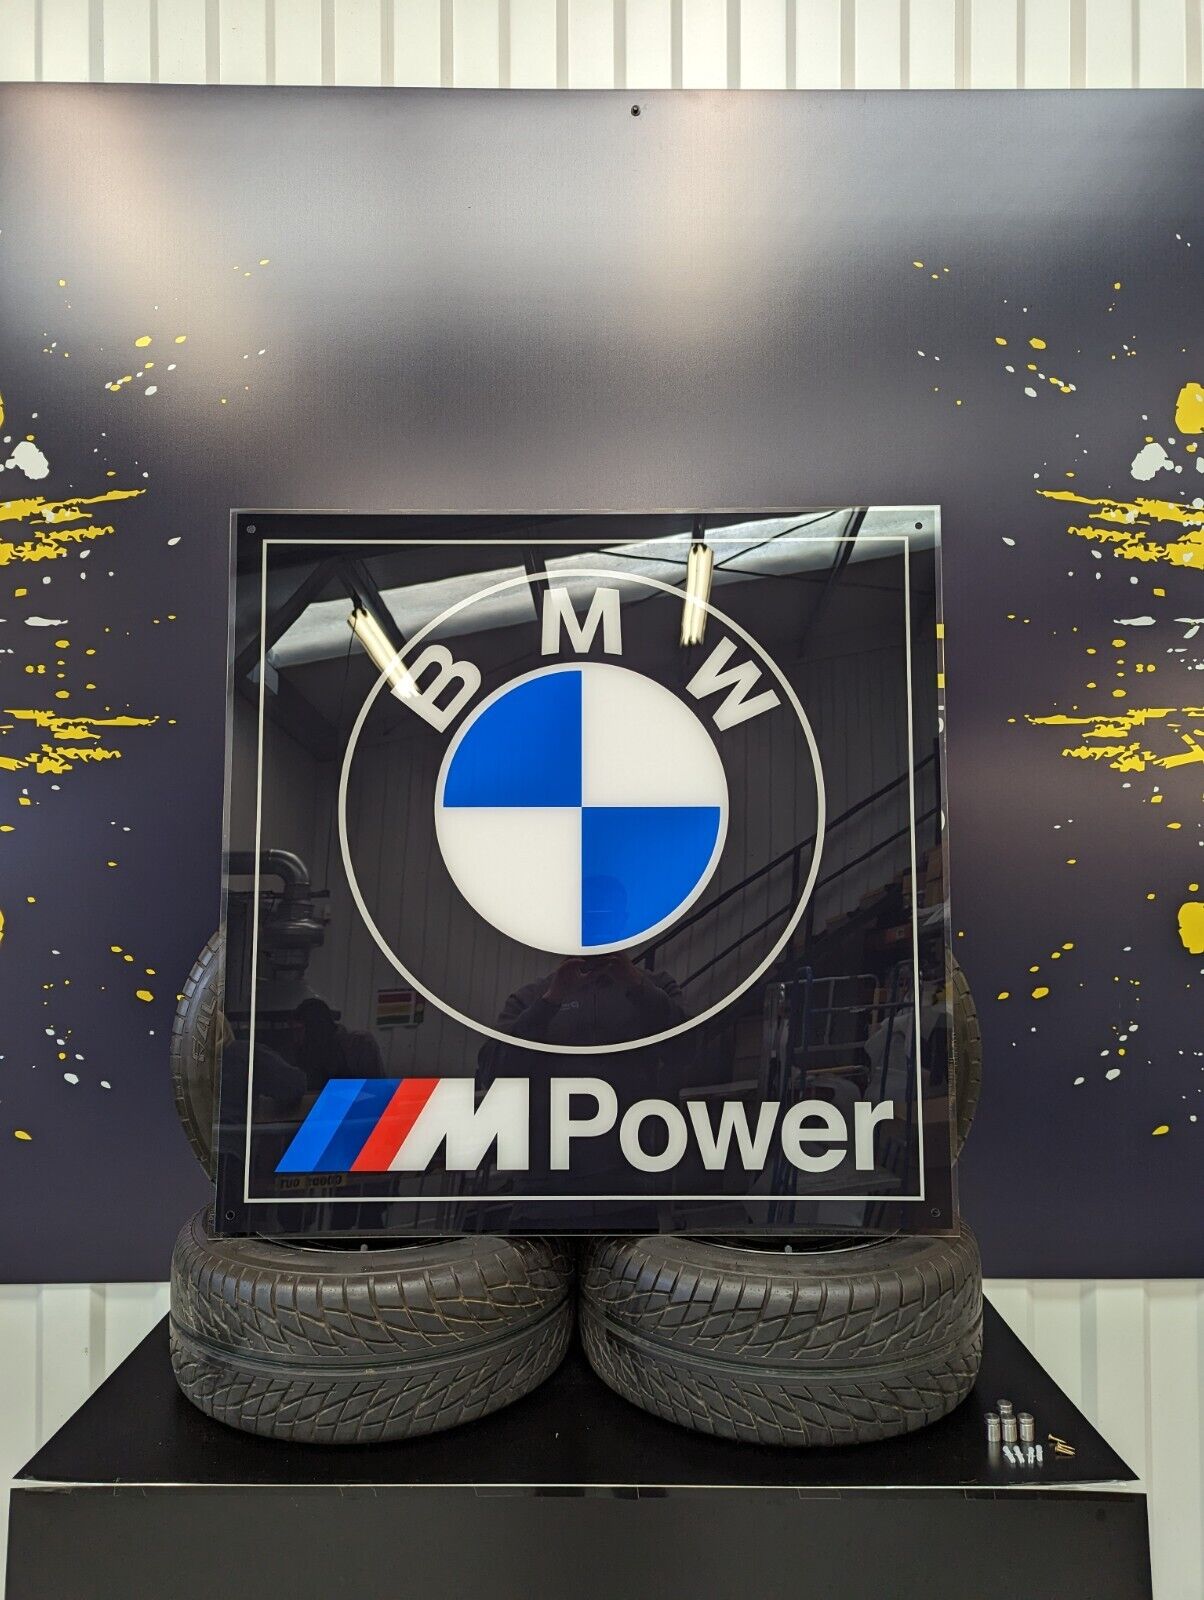 BMW M POWER logo LARGE wall hanging acrylic sign for garage mancave E36FD